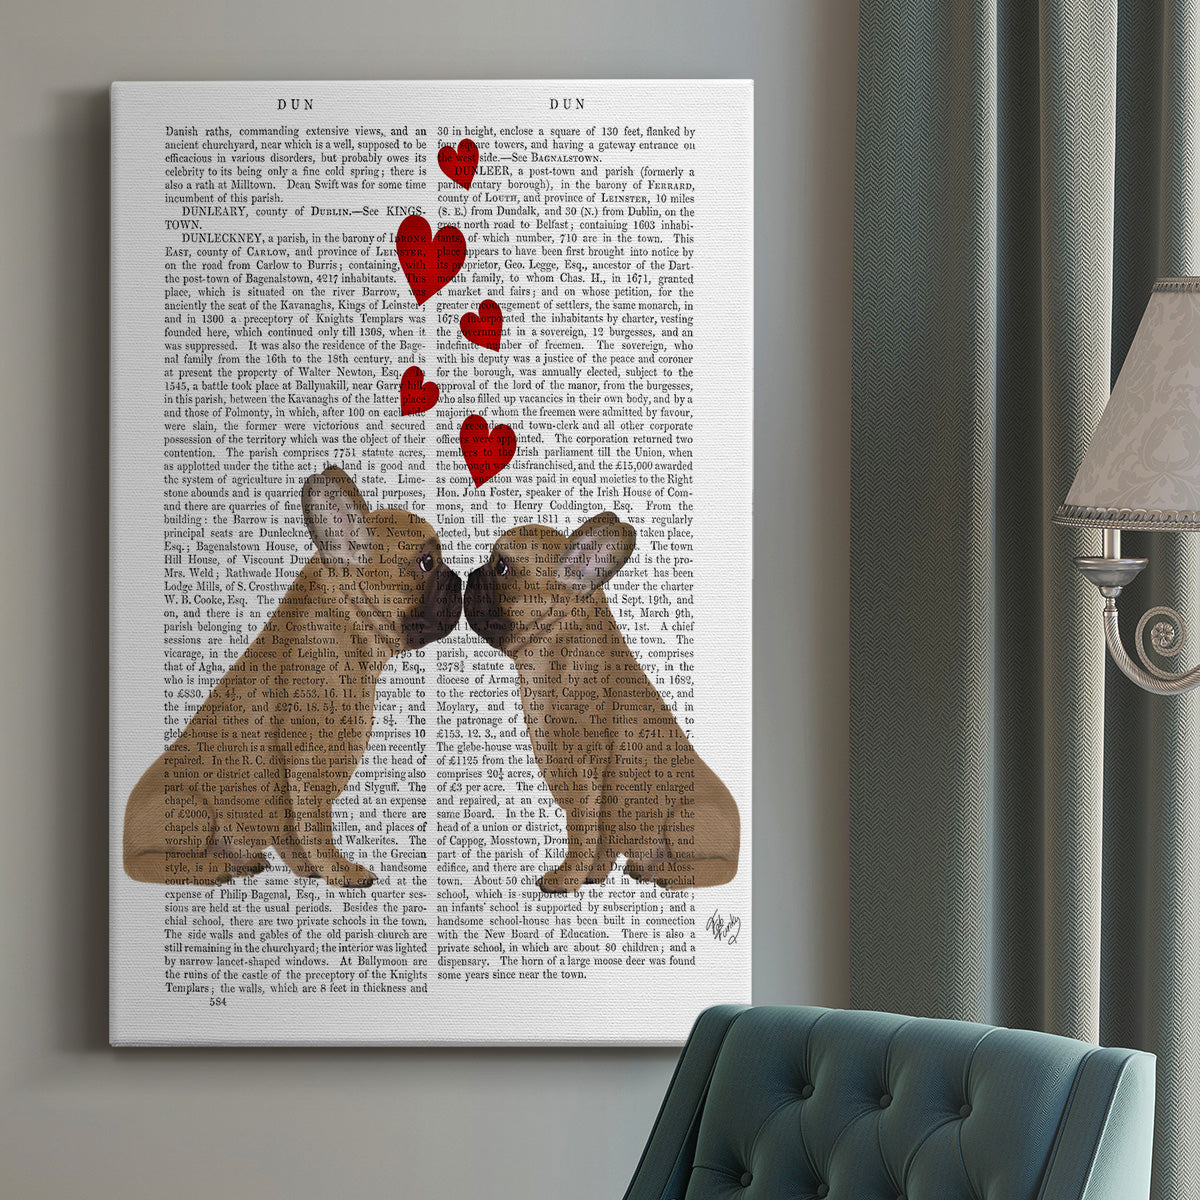 French Kiss and Hearts Premium Gallery Wrapped Canvas - Ready to Hang